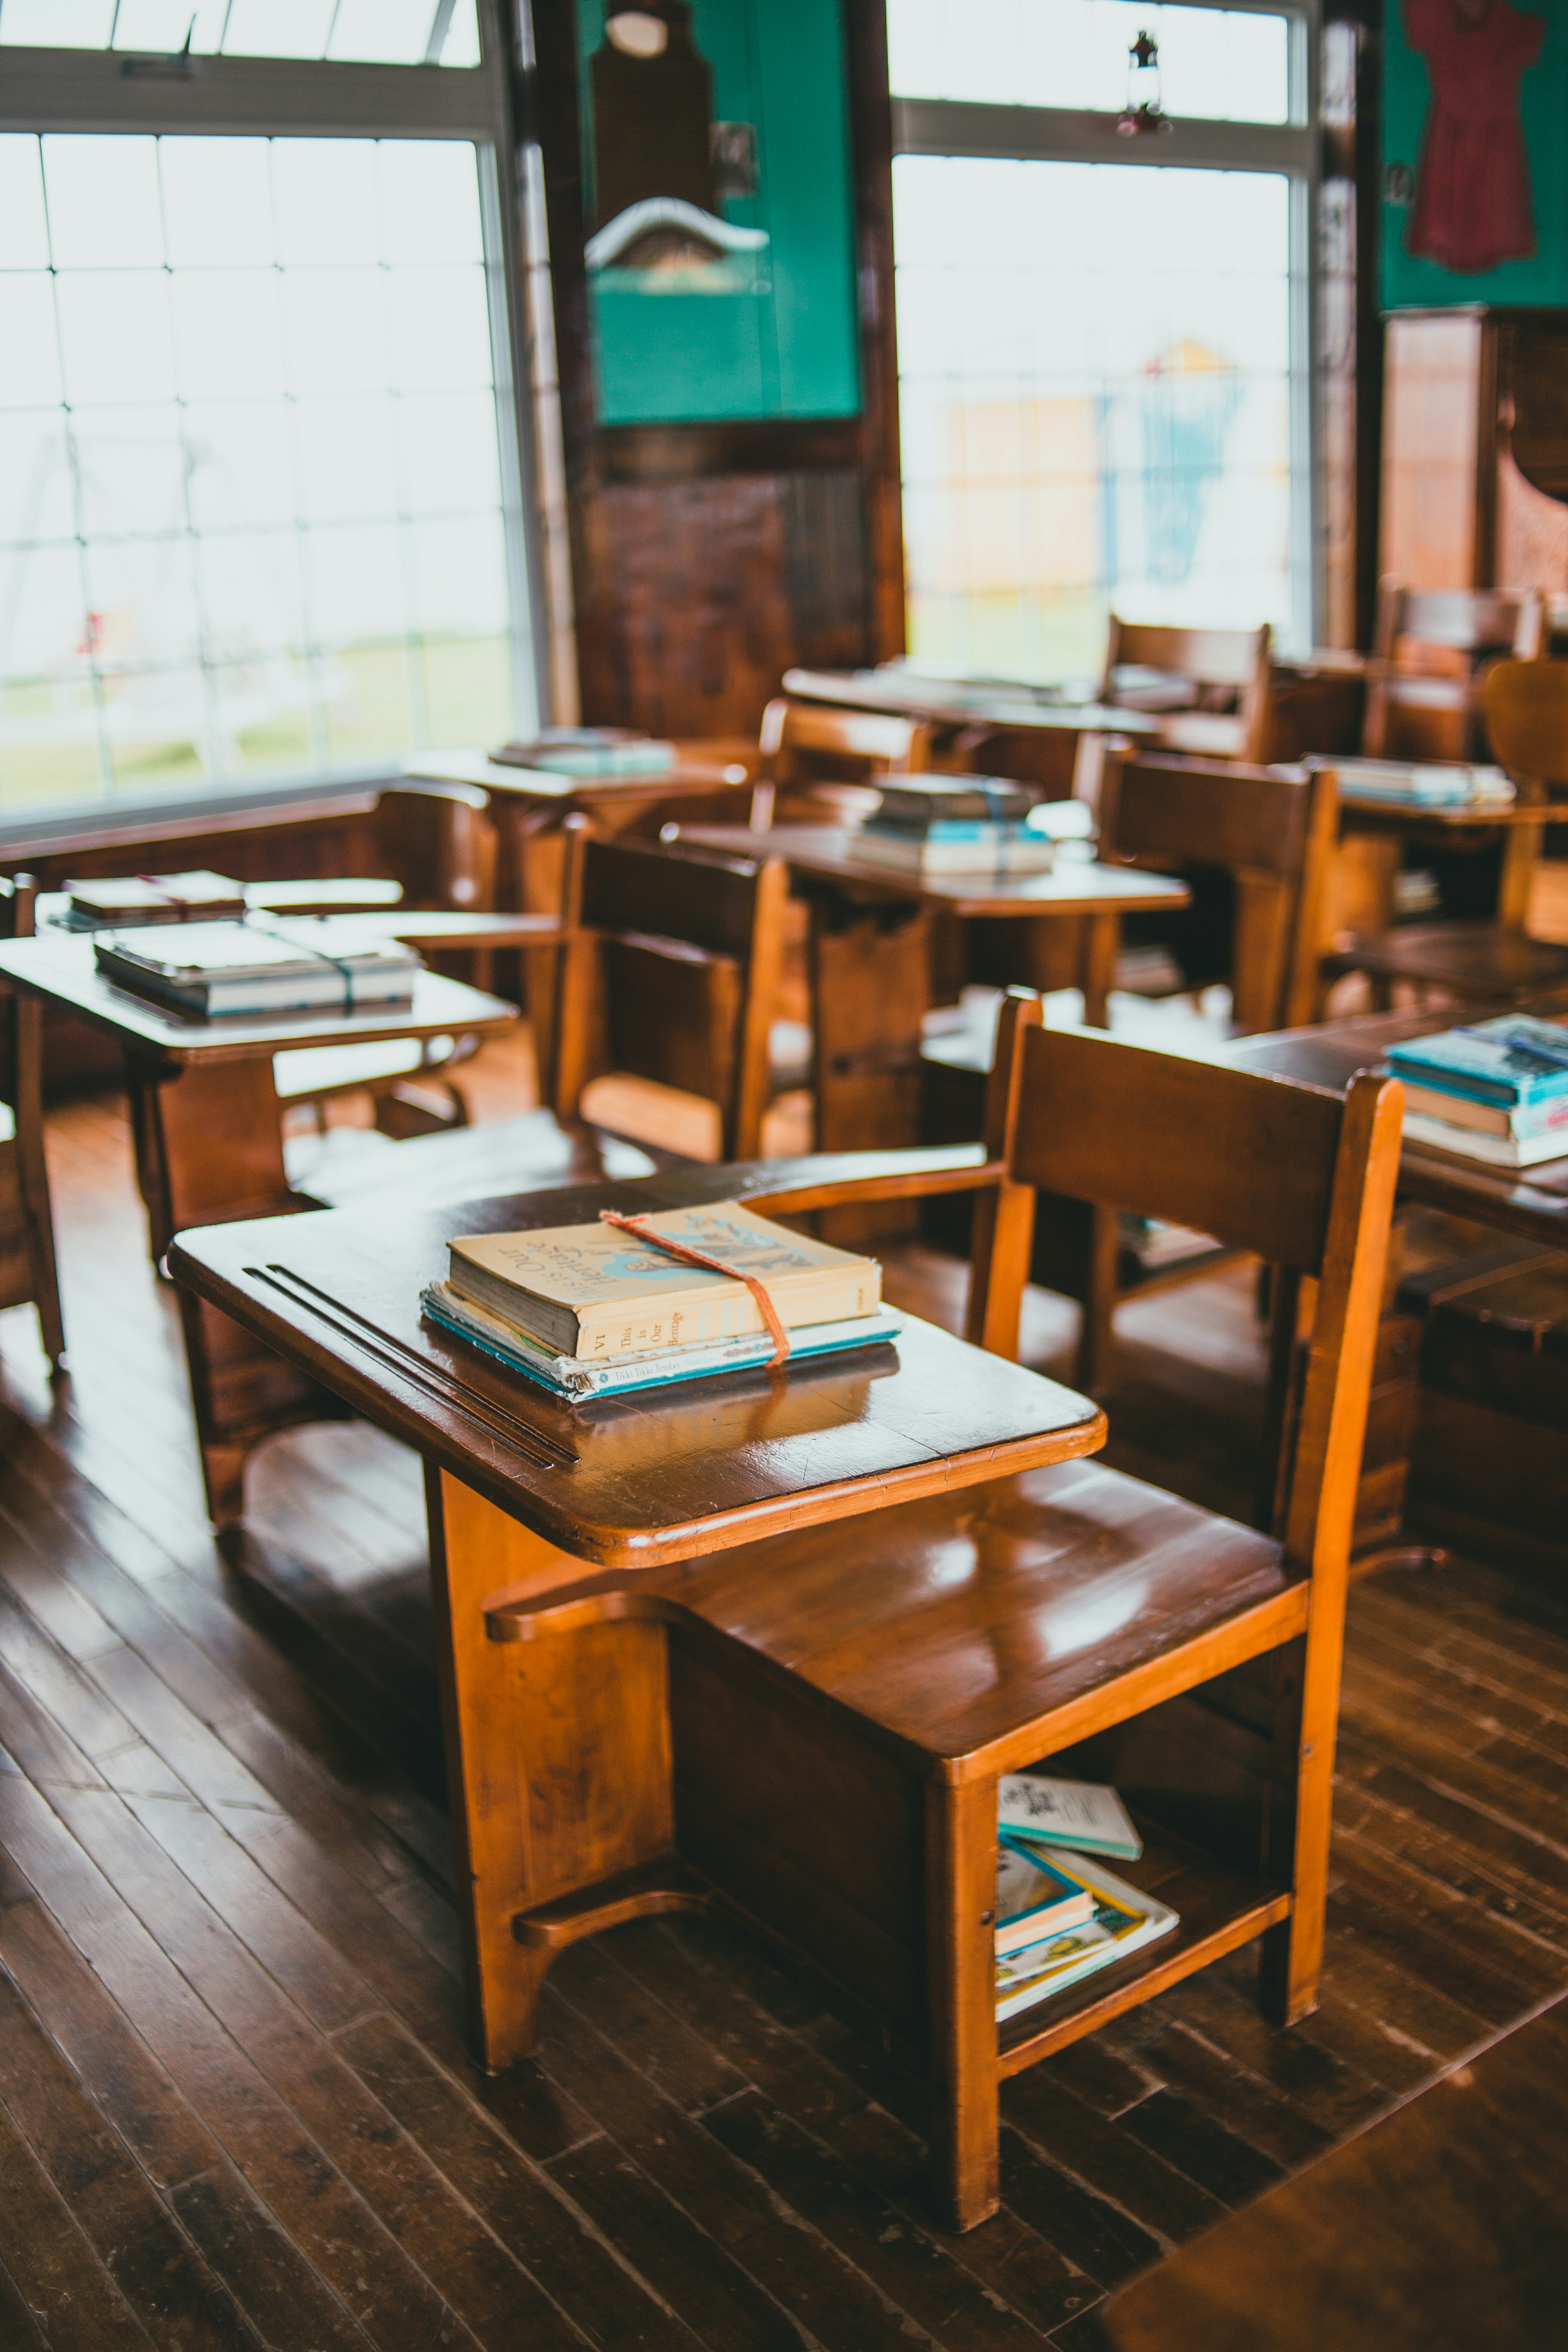 A classroom with desks, chairs, and books. Photo by Erik Mclean on Unsplash